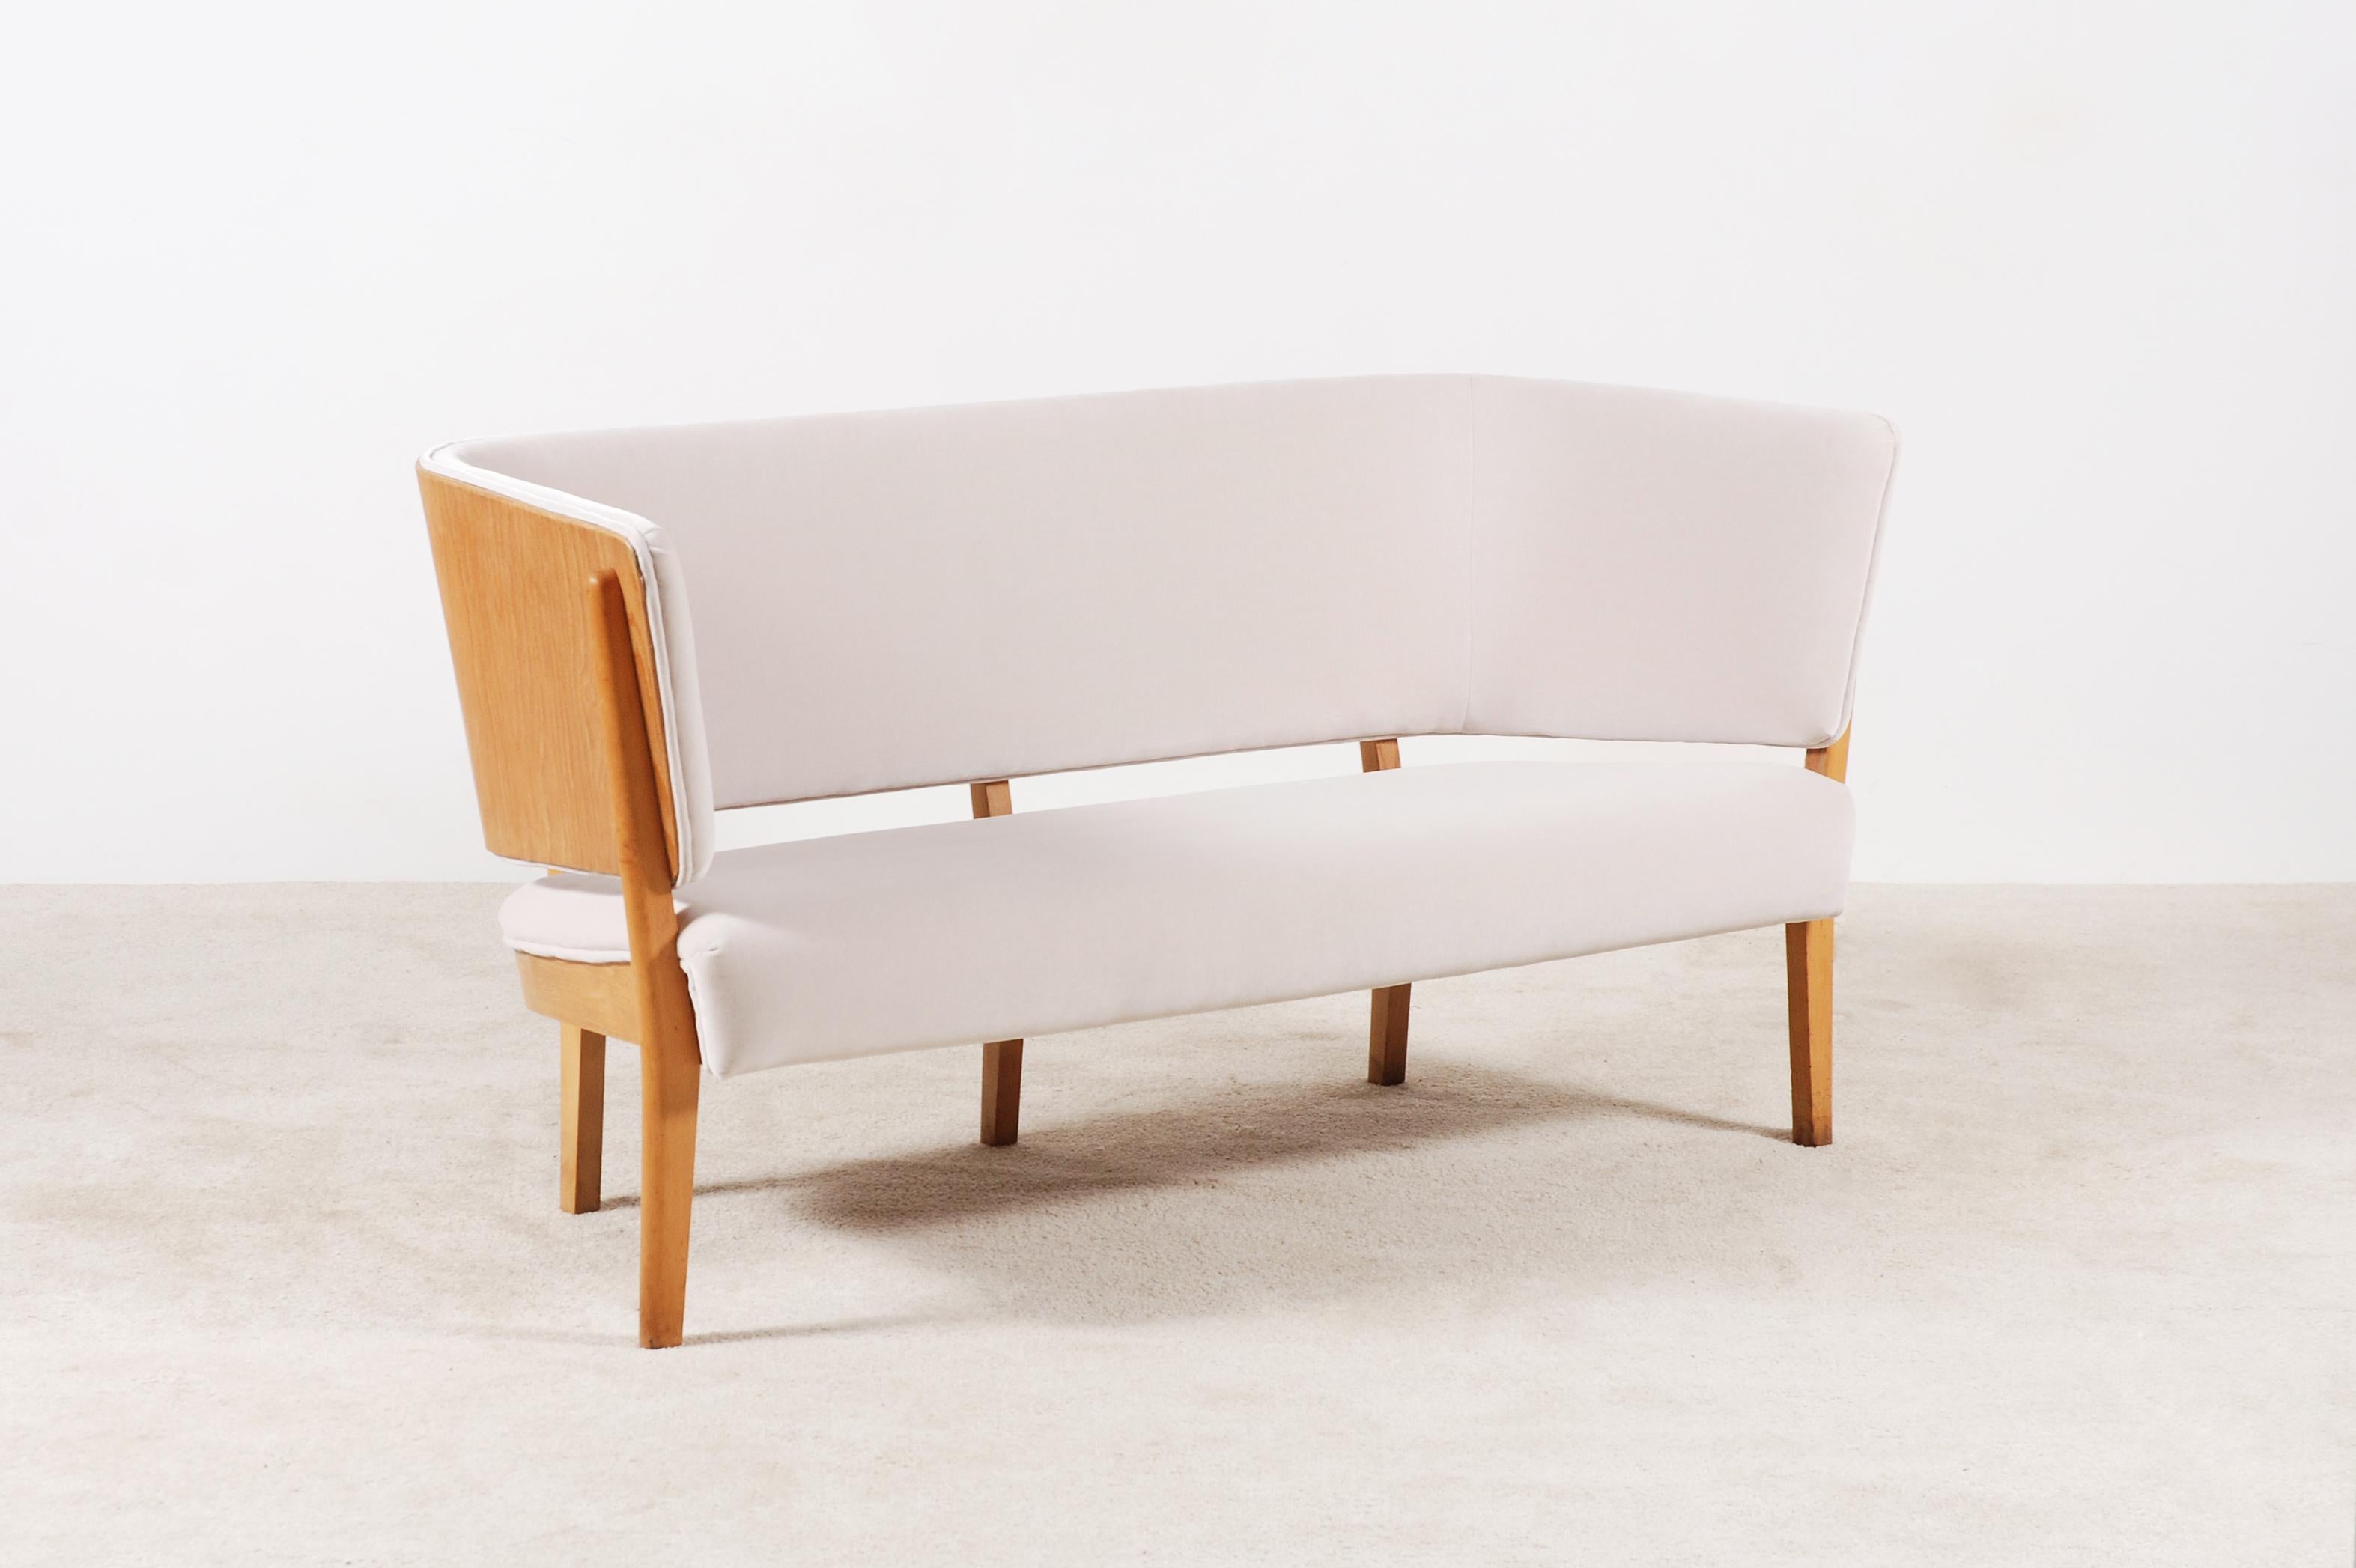 Two-seat sofa, model 2240, made of Beech wood designed by Søren Hansen in 1939 and manufactured by Fritz Hansen. 
A rare find and very collectable piece.
As a sculptural piece, this lovely sofa/bench could find a place in any impressive house,